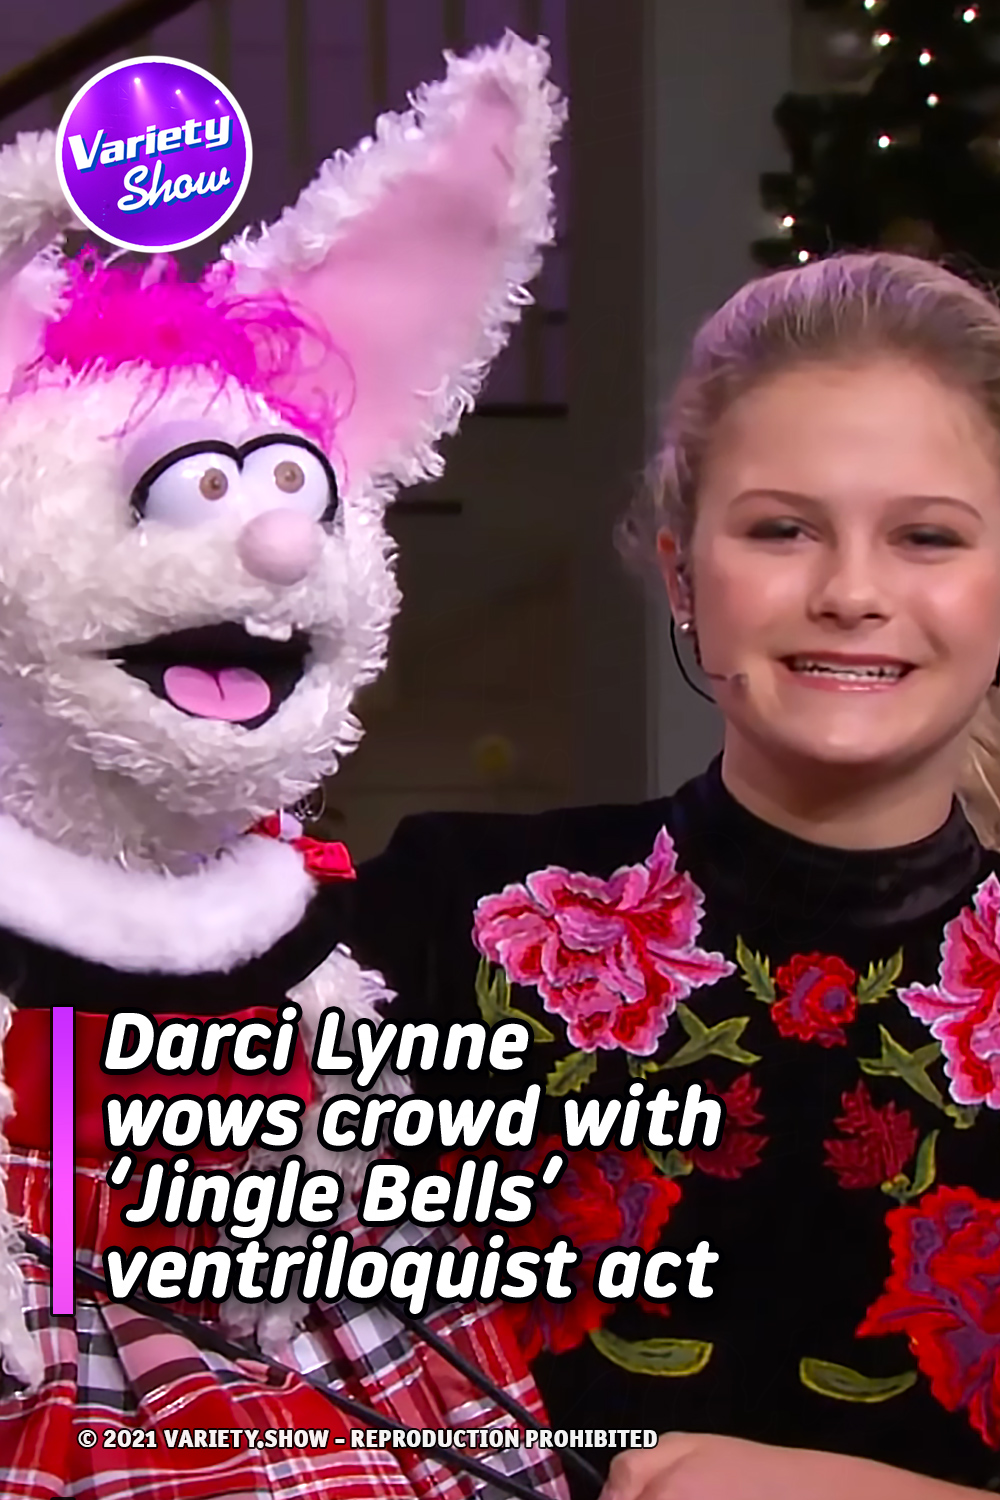 Darci Lynne wows crowd with ‘Jingle Bells’ ventriloquist act